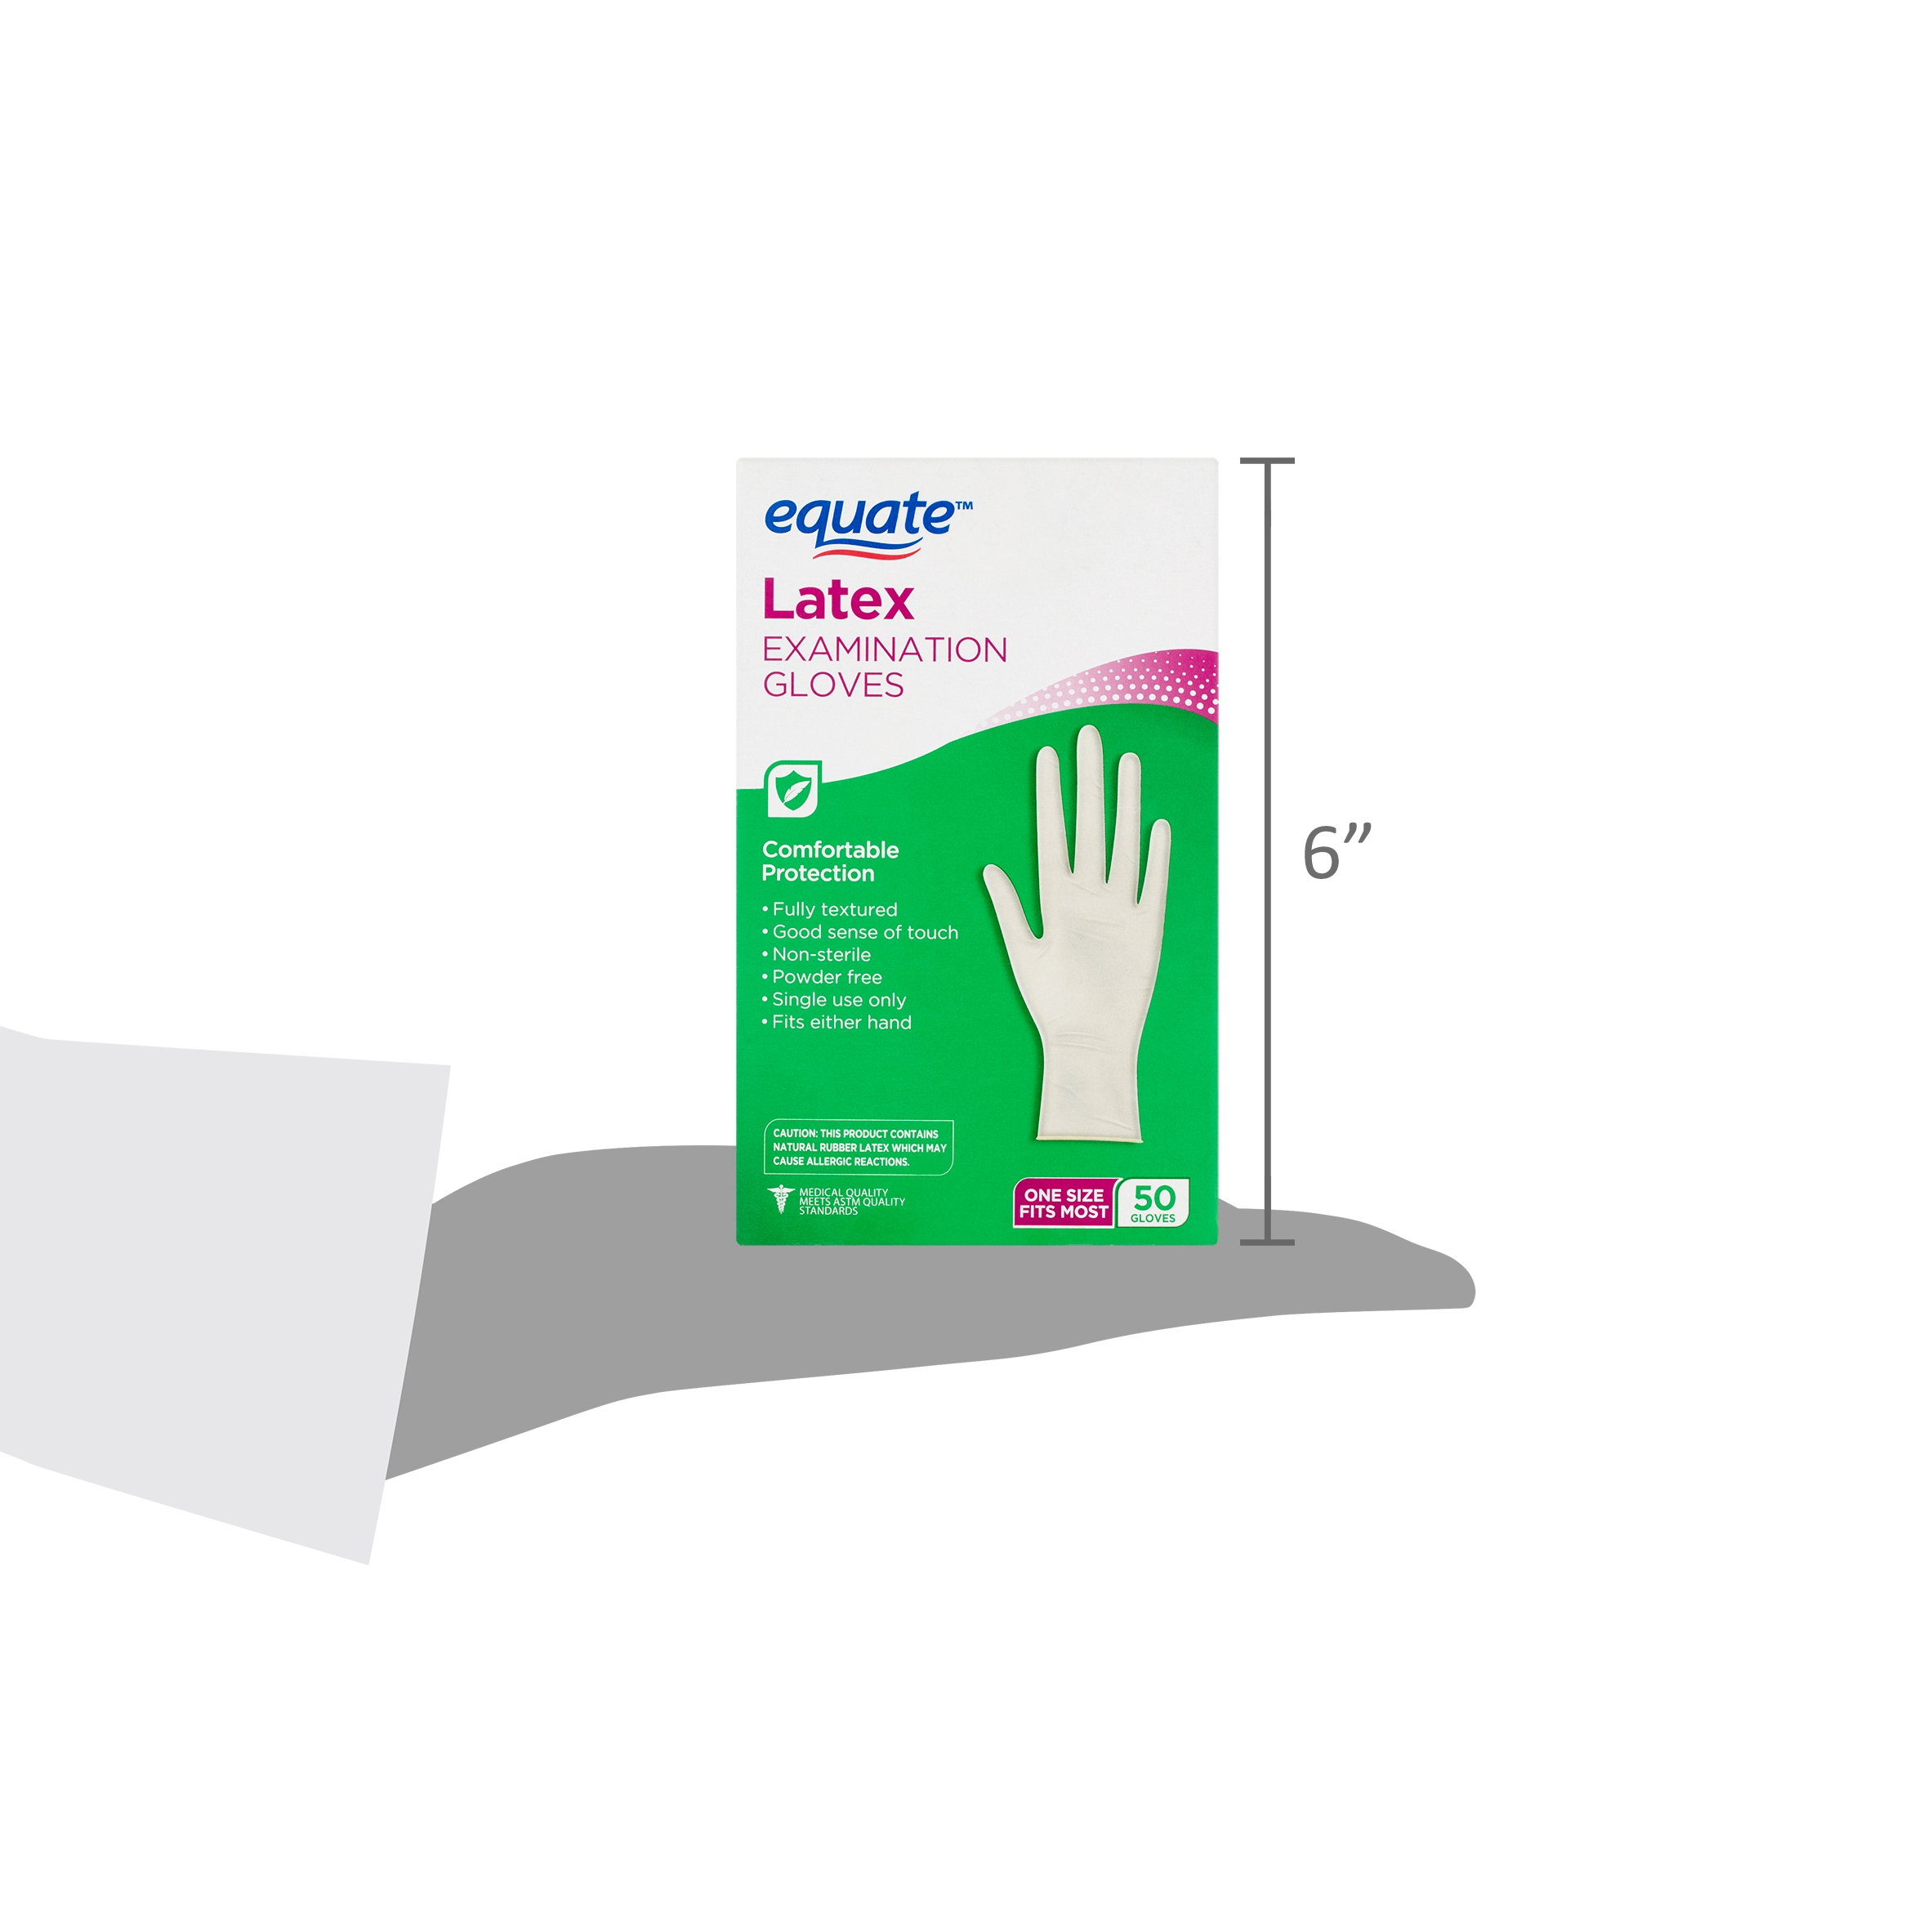 Equate Latex Examination Gloves, 50 Count - image 6 of 10